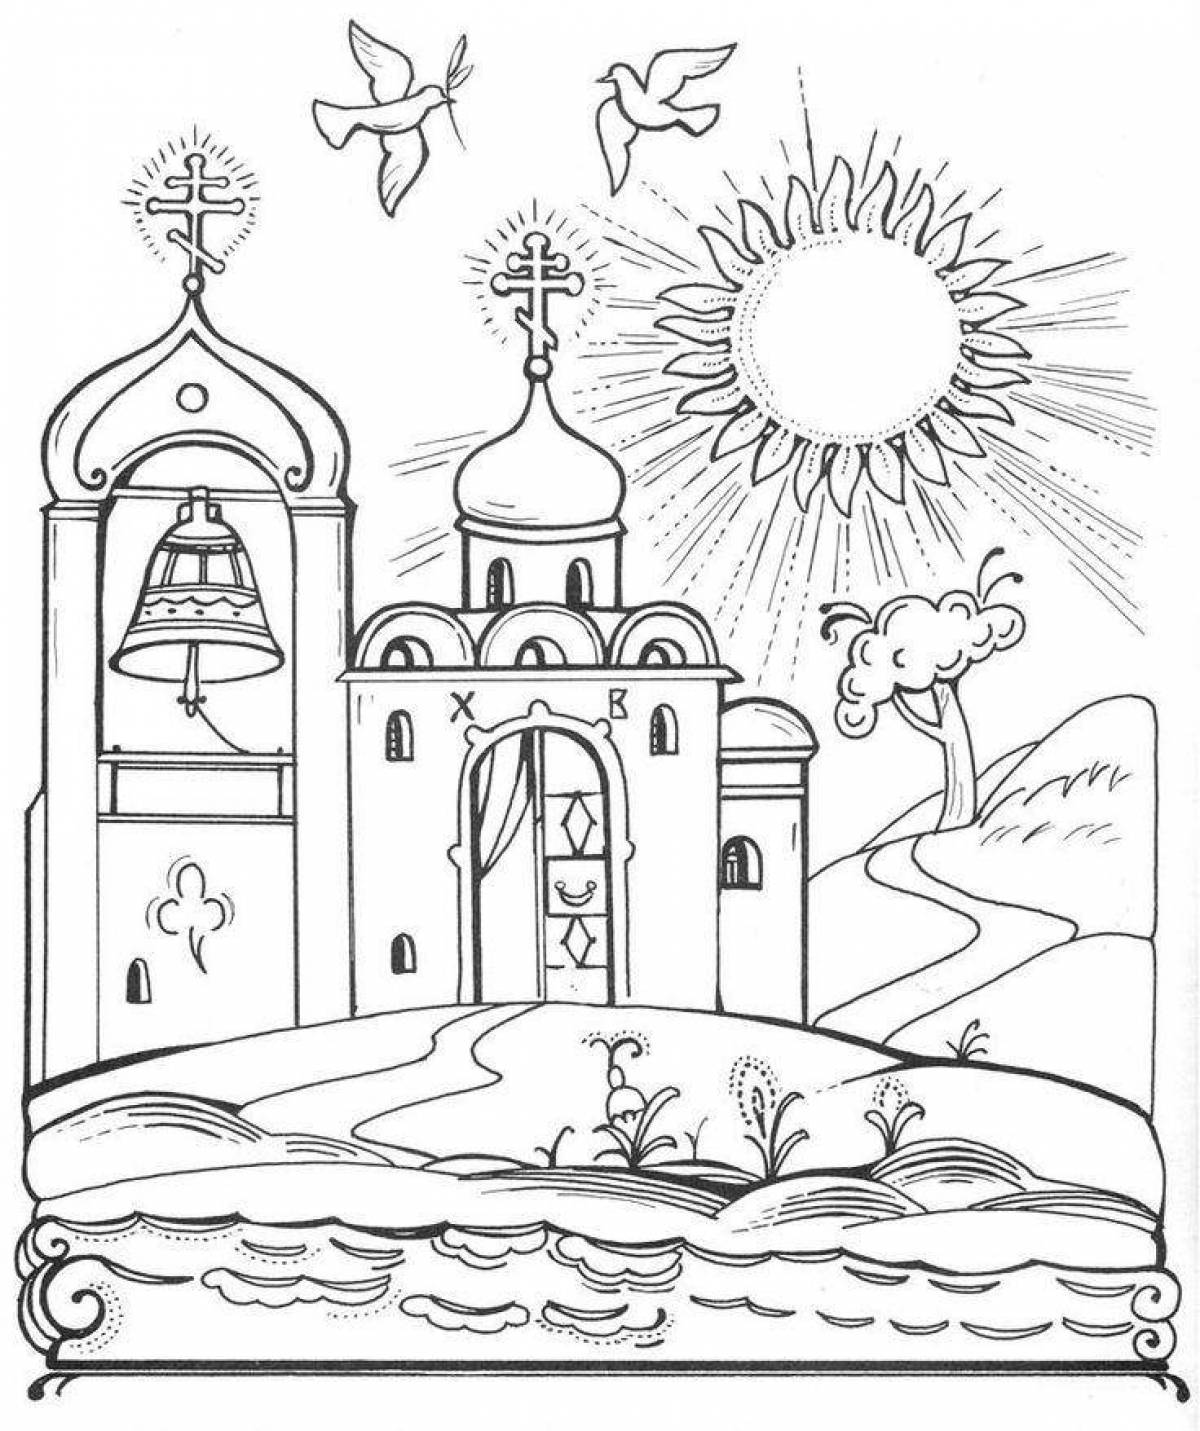 Exquisite coloring pages of temples and churches for children